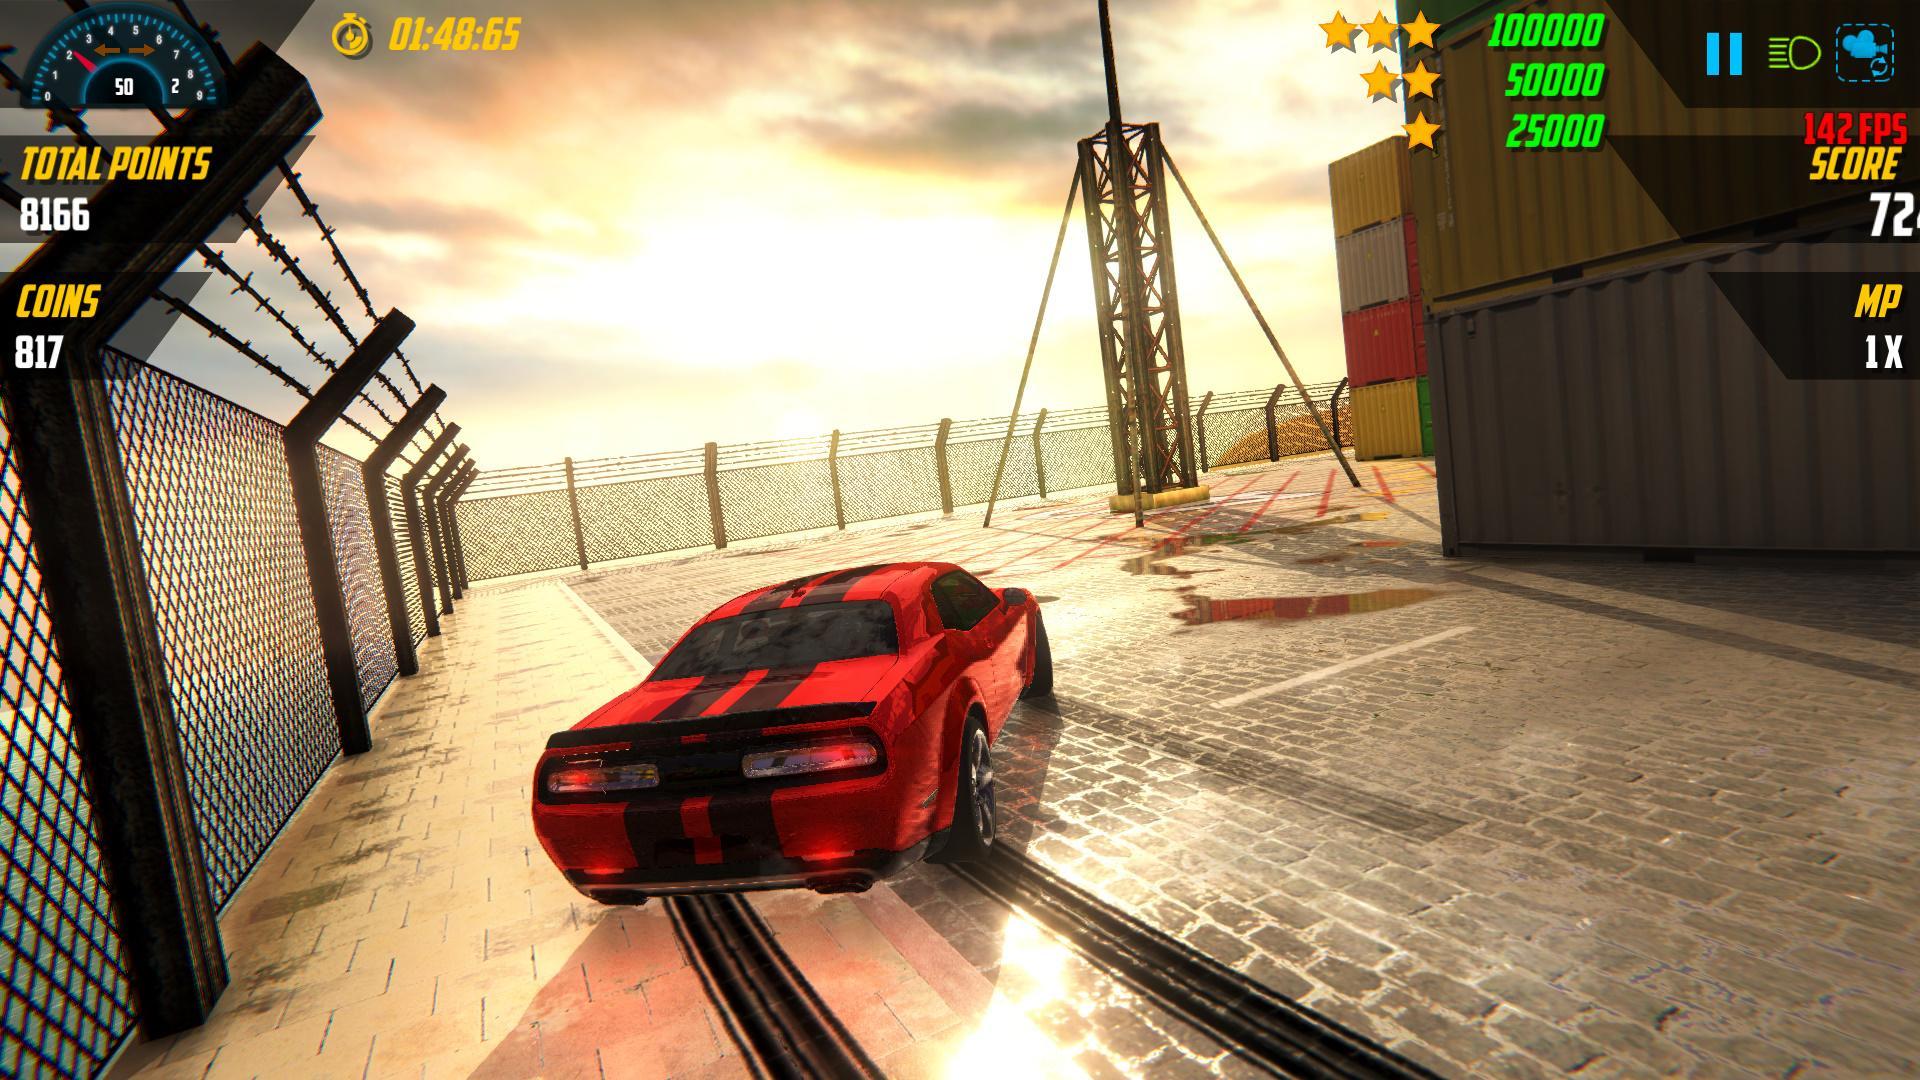 Burnout Drift 3 for Android - APK Download